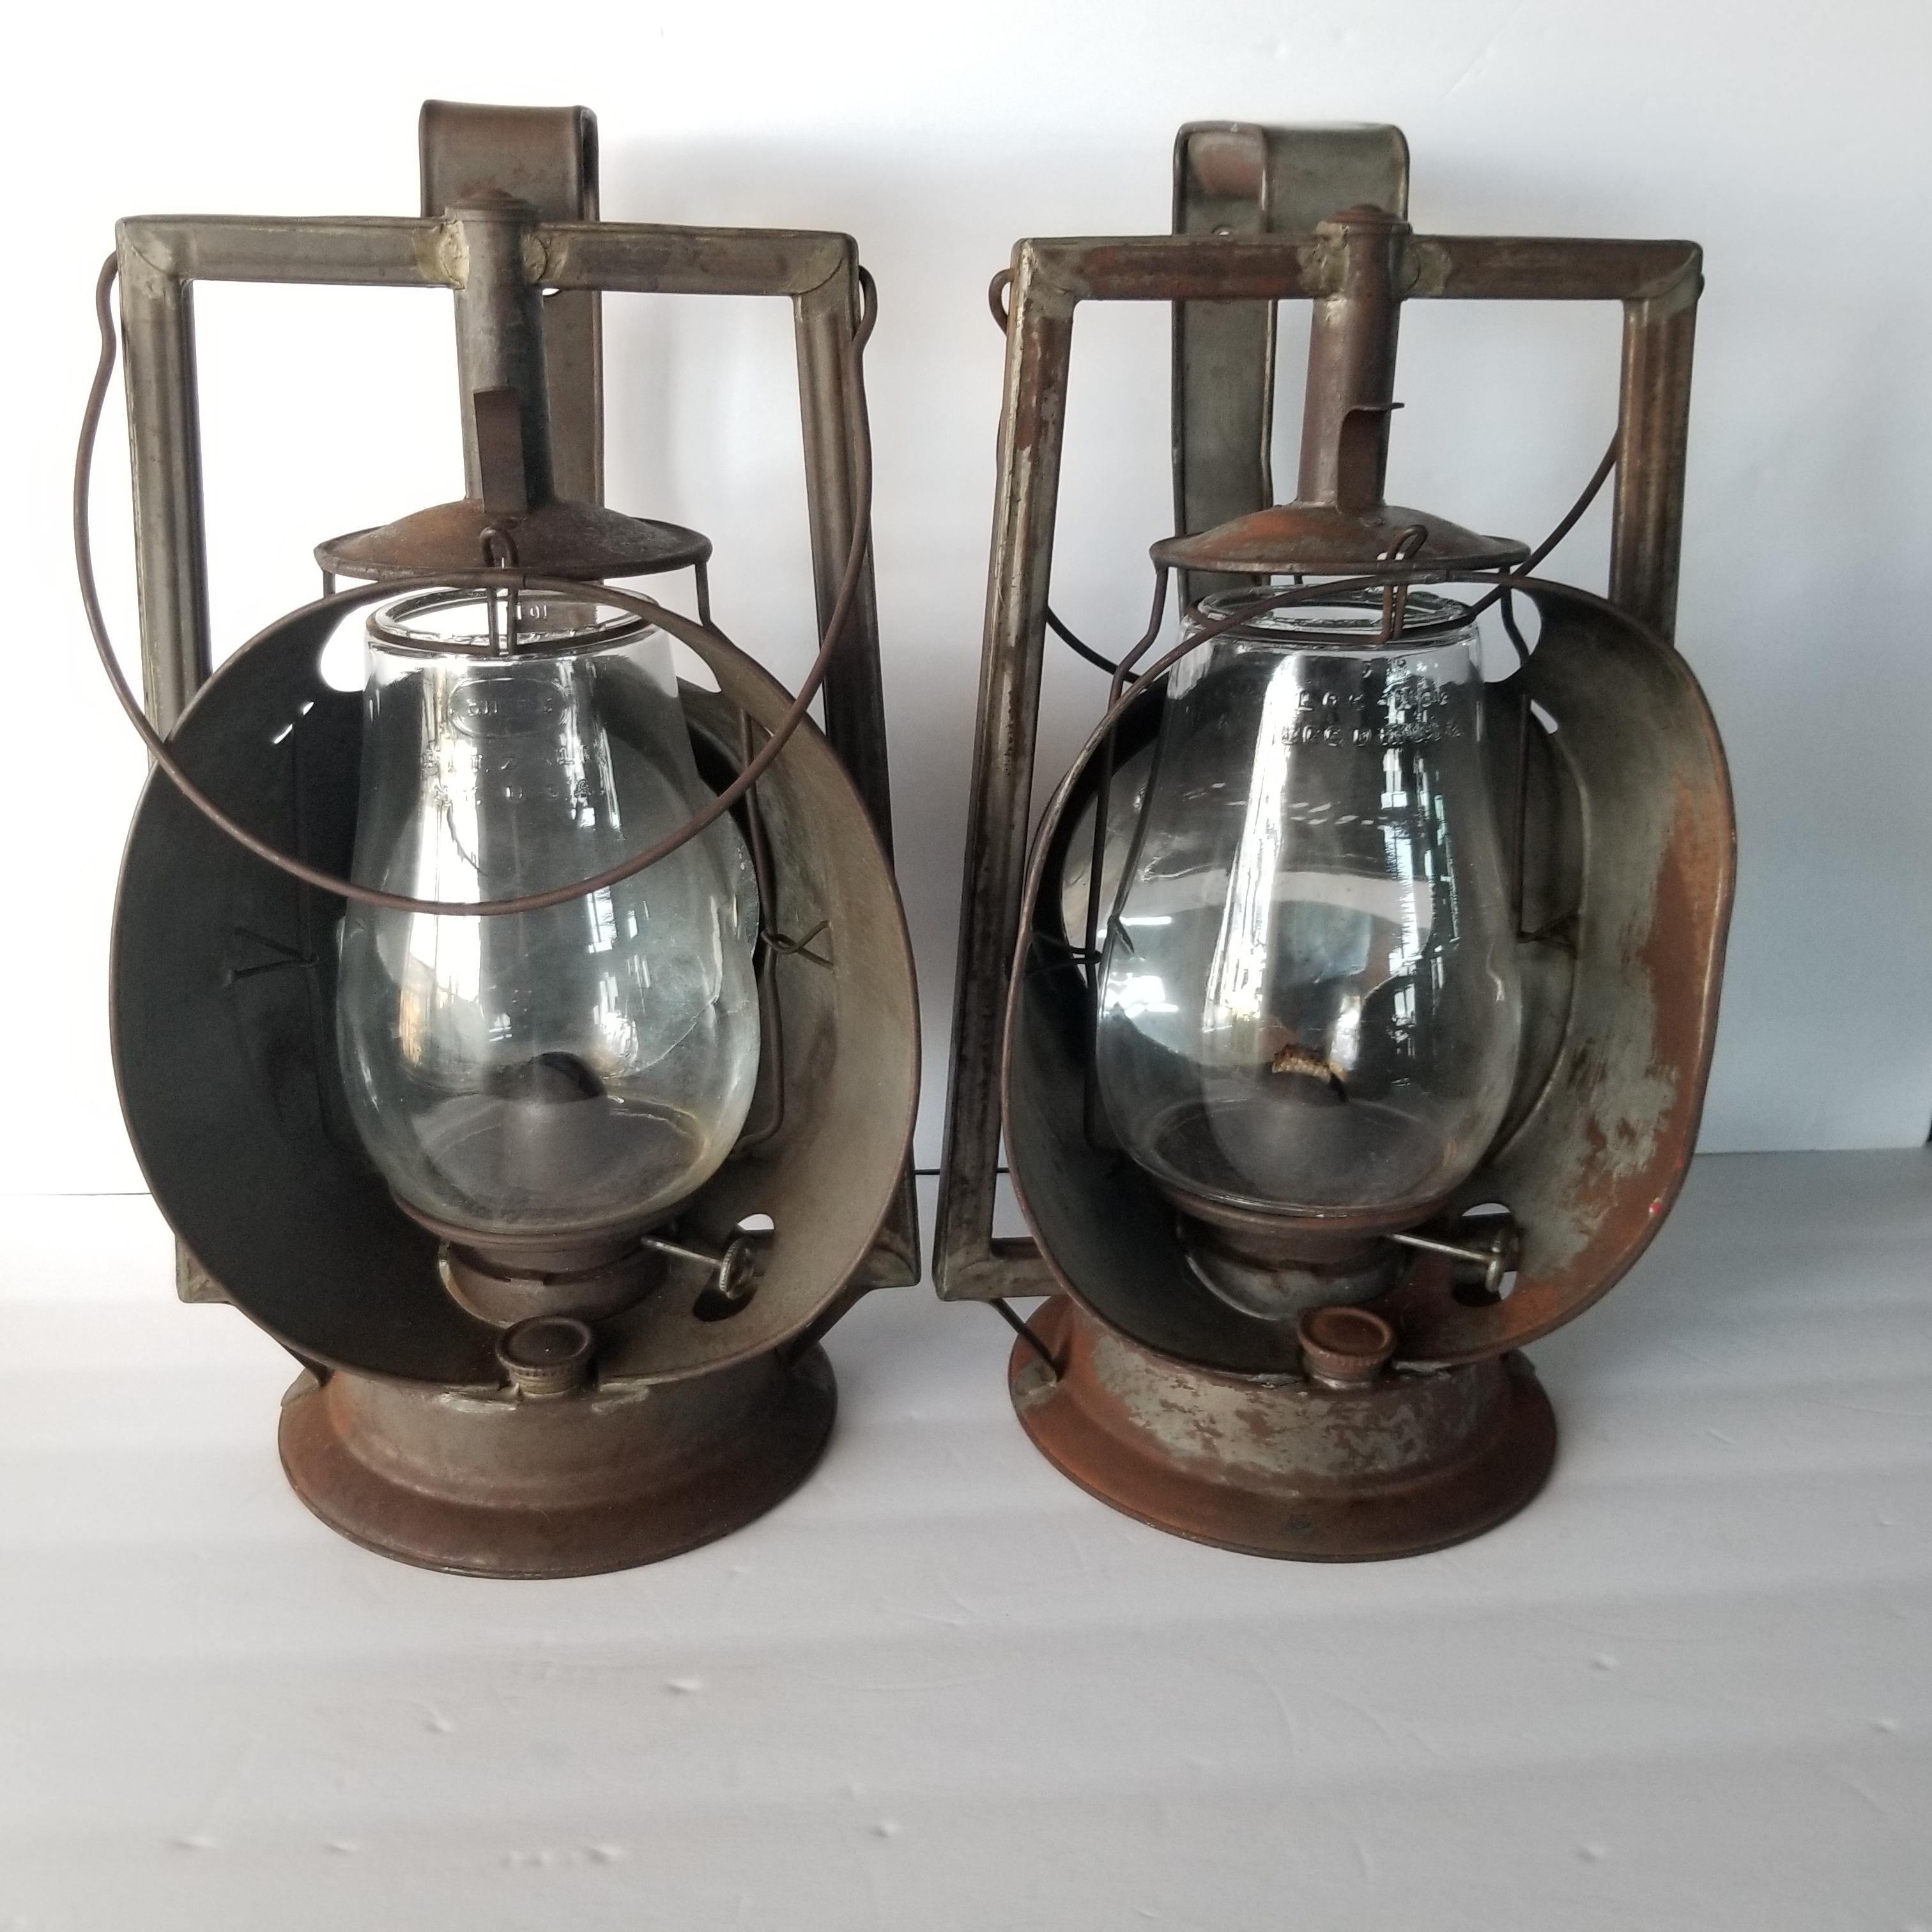 Train lantern lamps.
Pair of Antique Dietz acme large inspector lamps railroad train lanterns New York early 1900s
Designed to throw off a lot of light. Wonderful railroad collectible ideal as modern decorative lamp.
Both lamps include 7-inch